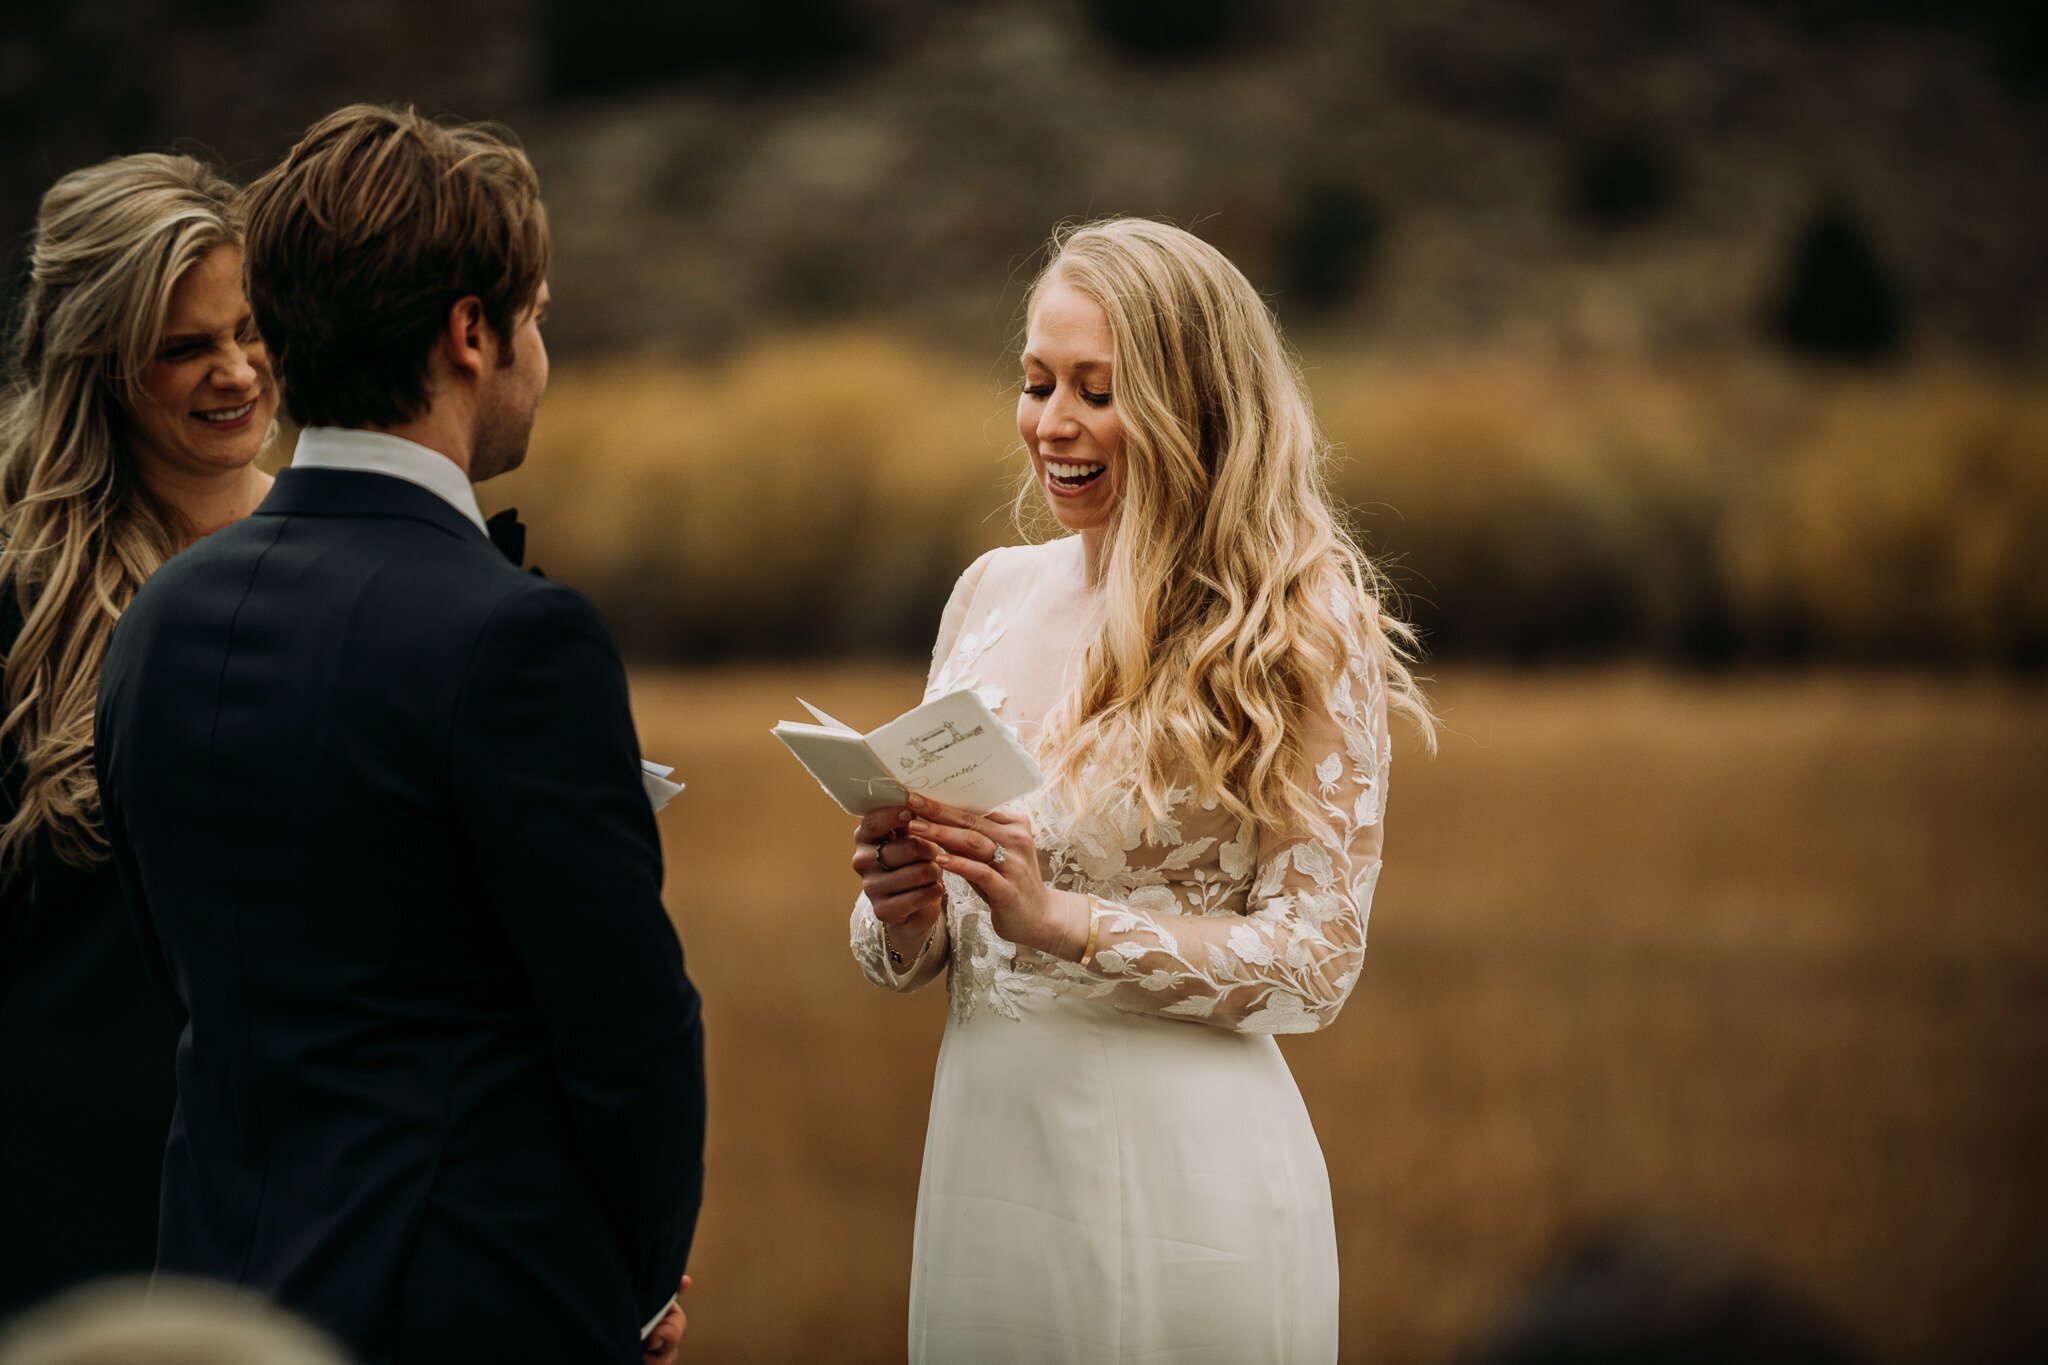 Bride during Fall ceremony at Brush Creek Ranch outdoor wedding reading her vows from a small vow book to groom.